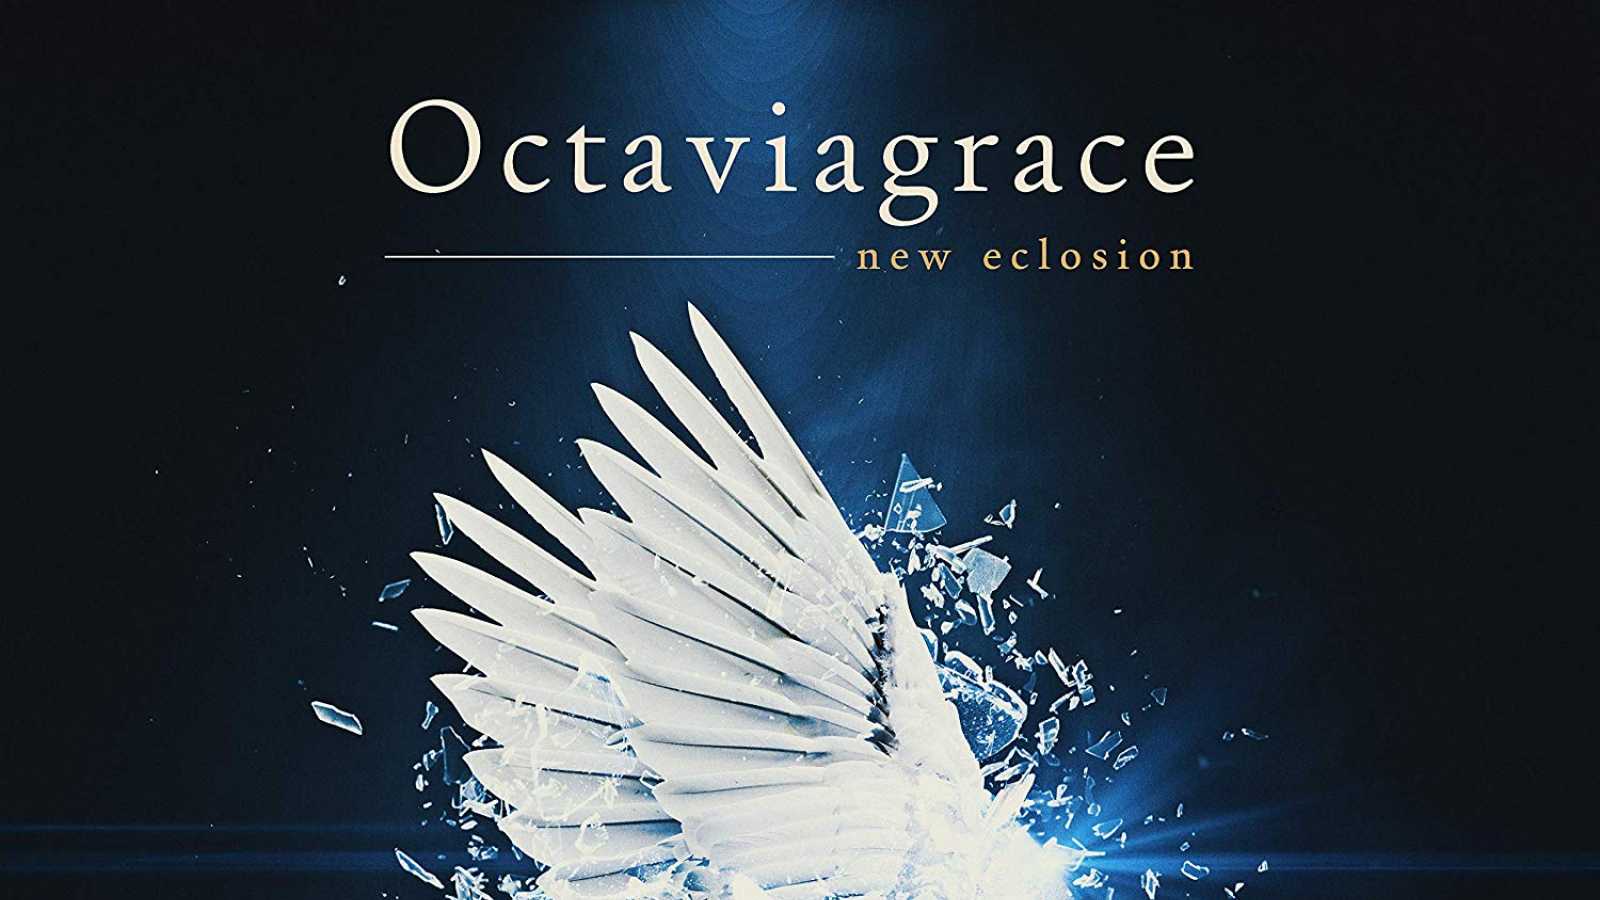 ﻿Octaviagrace - new eclosion © TEARS MUSIC. All rights reserved.